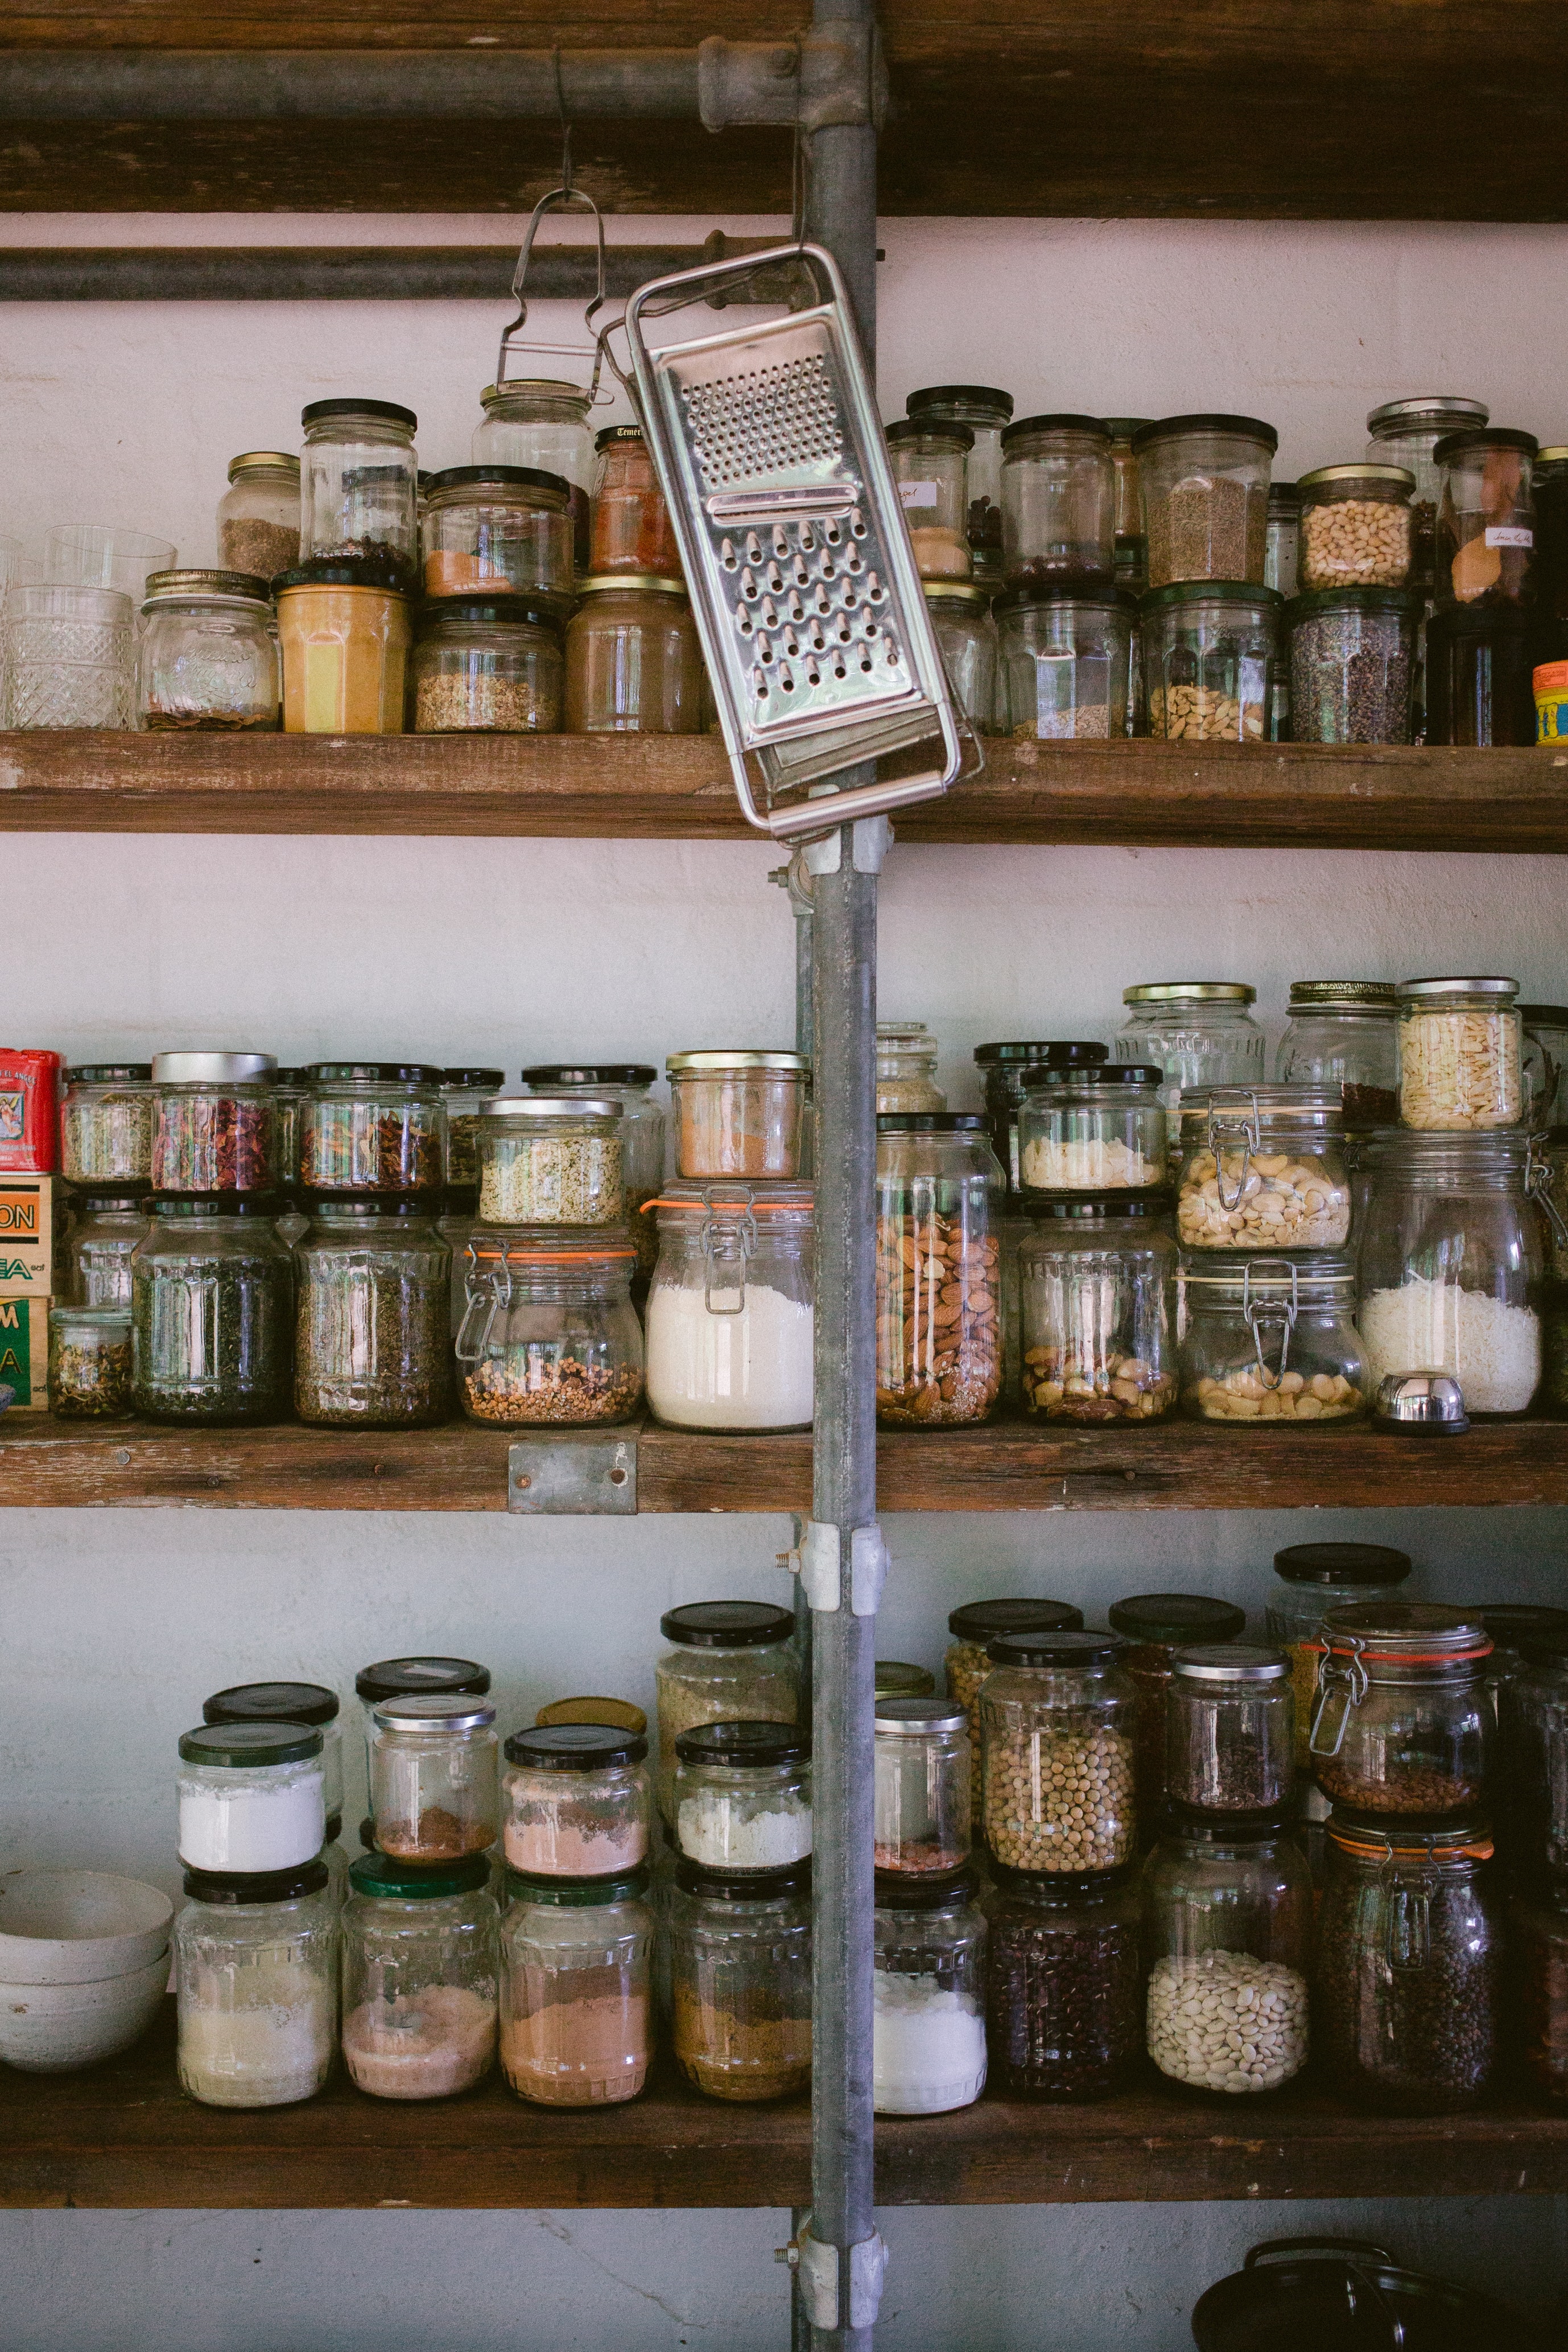 Pantry goods in reused glass containers